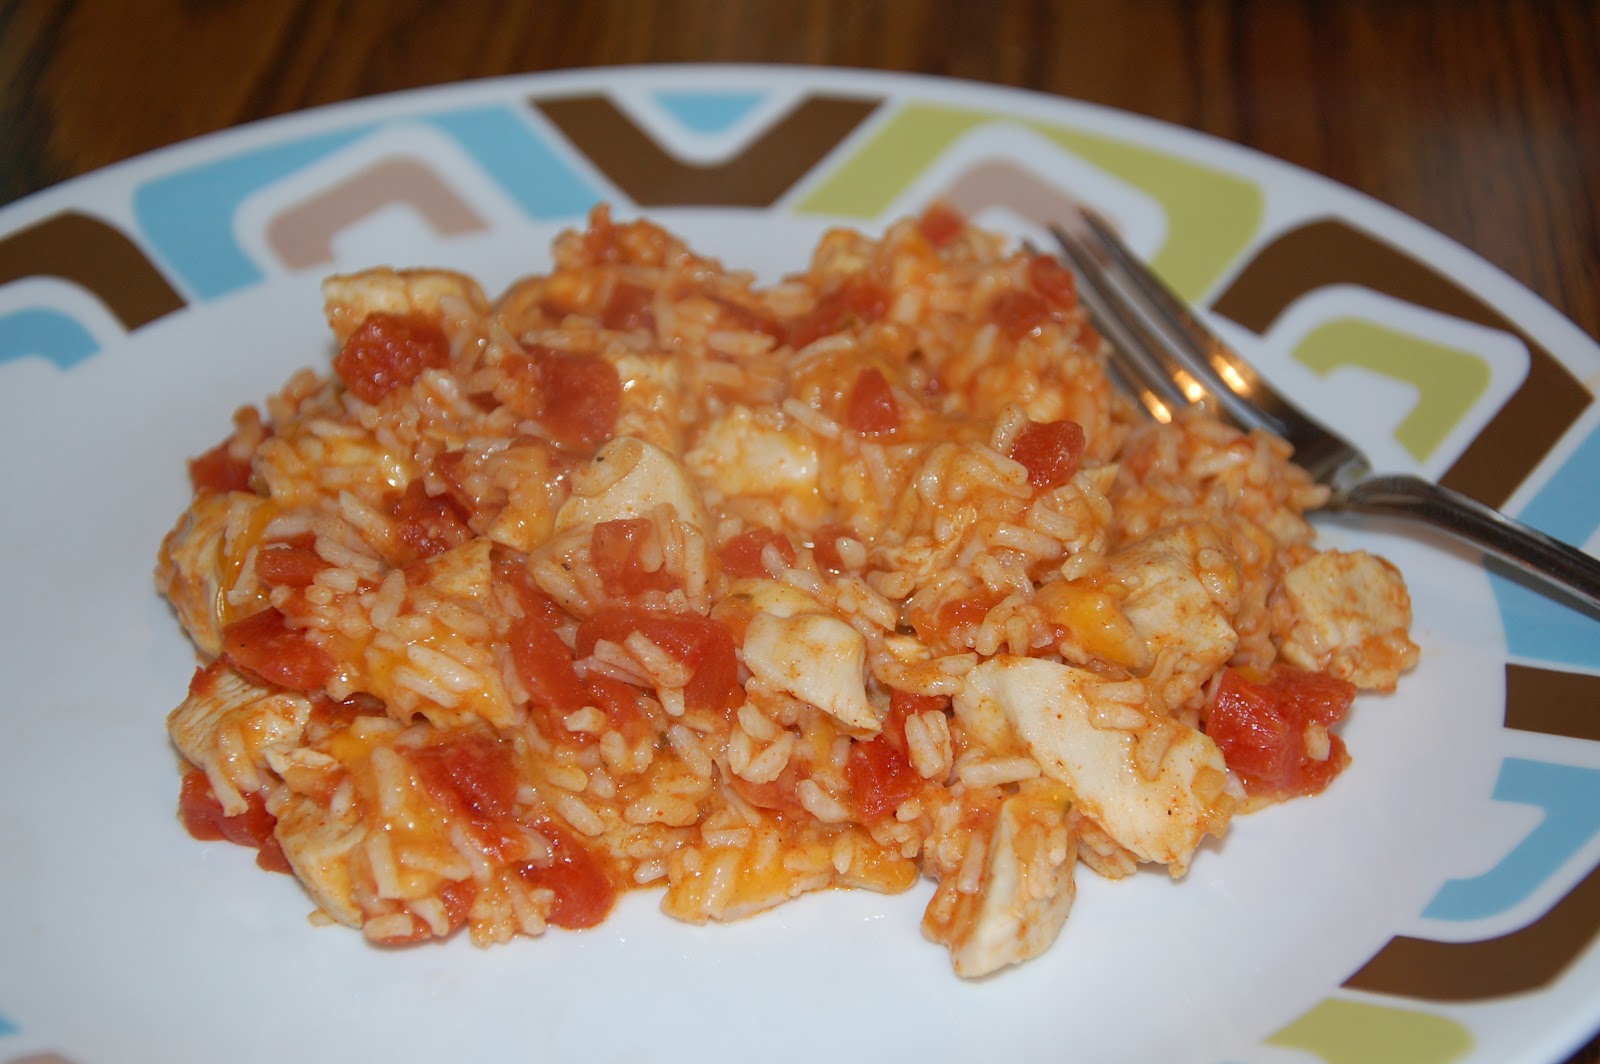 katie's korner: quick, easy, and cheap dinner ideas!